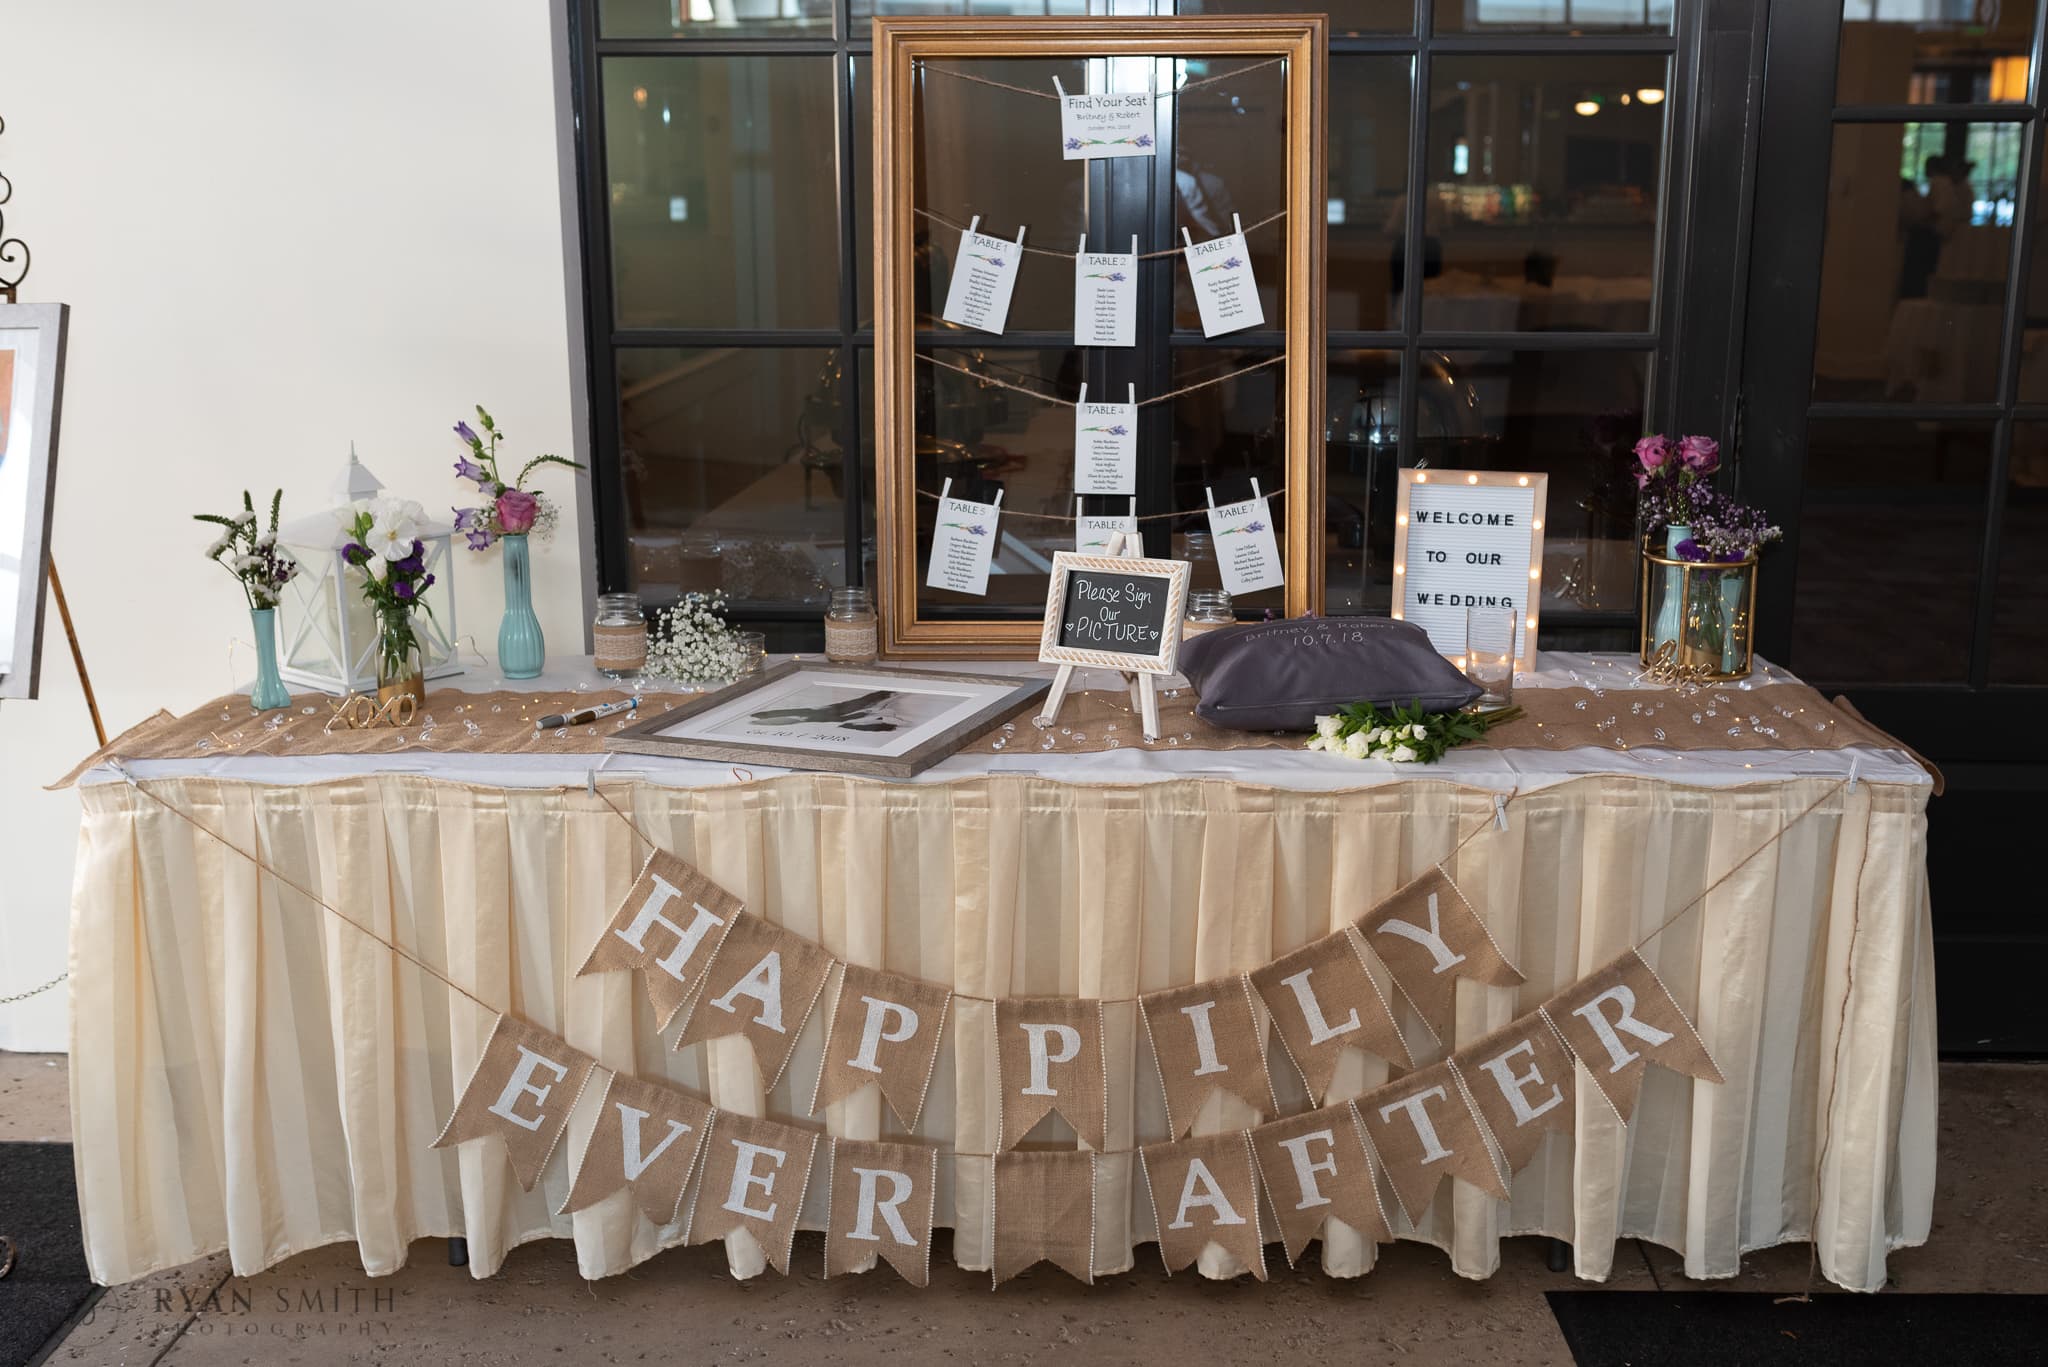 Happily ever after table -